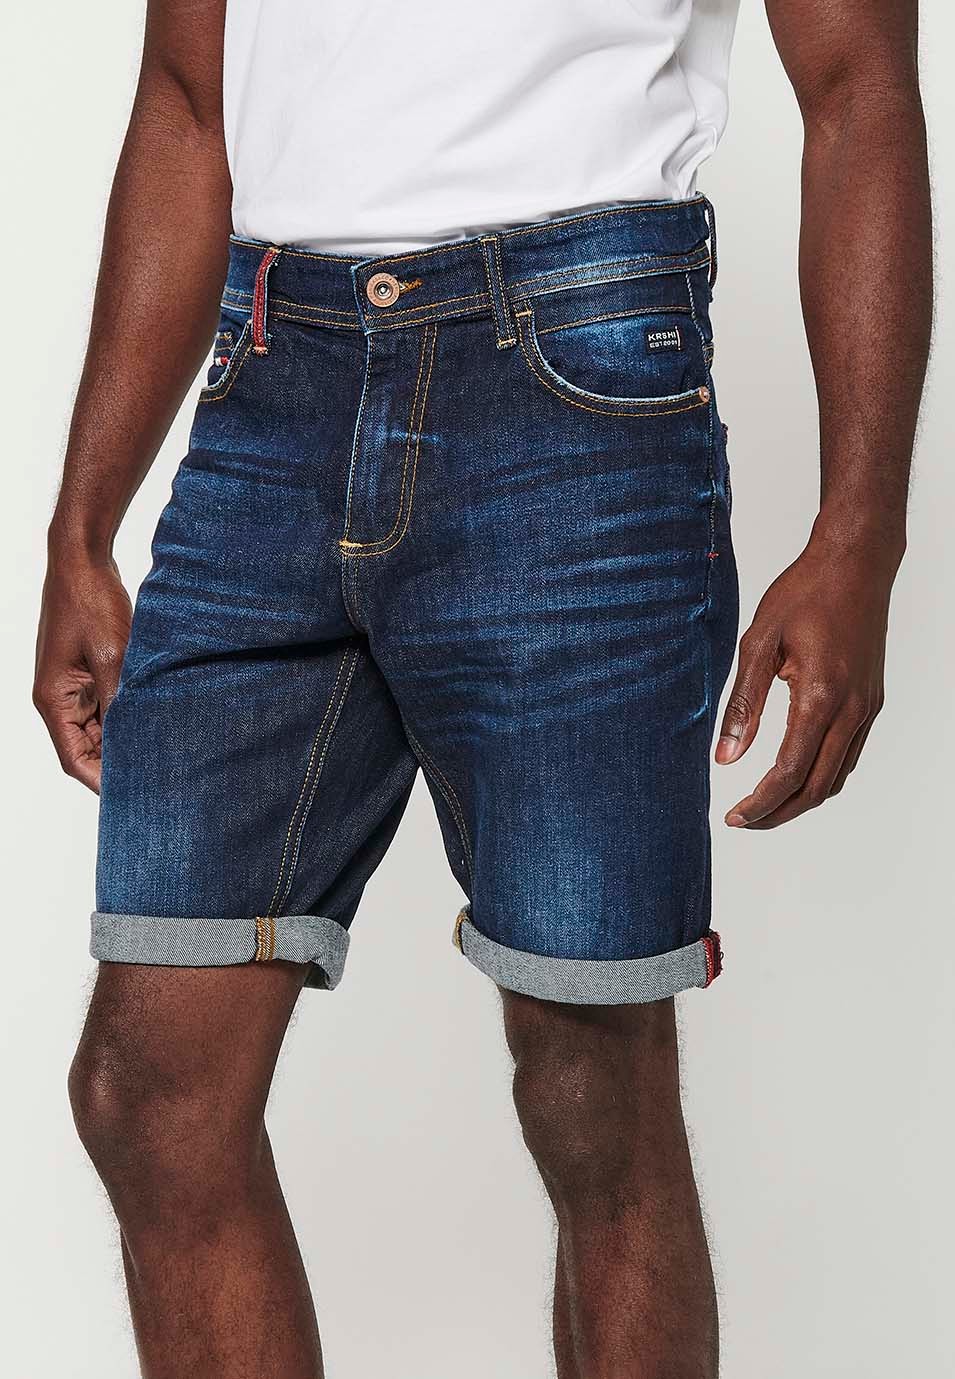 Shorts with turn-up finish and front zipper and button closure with five pockets, one blue pocket pocket for Men 5